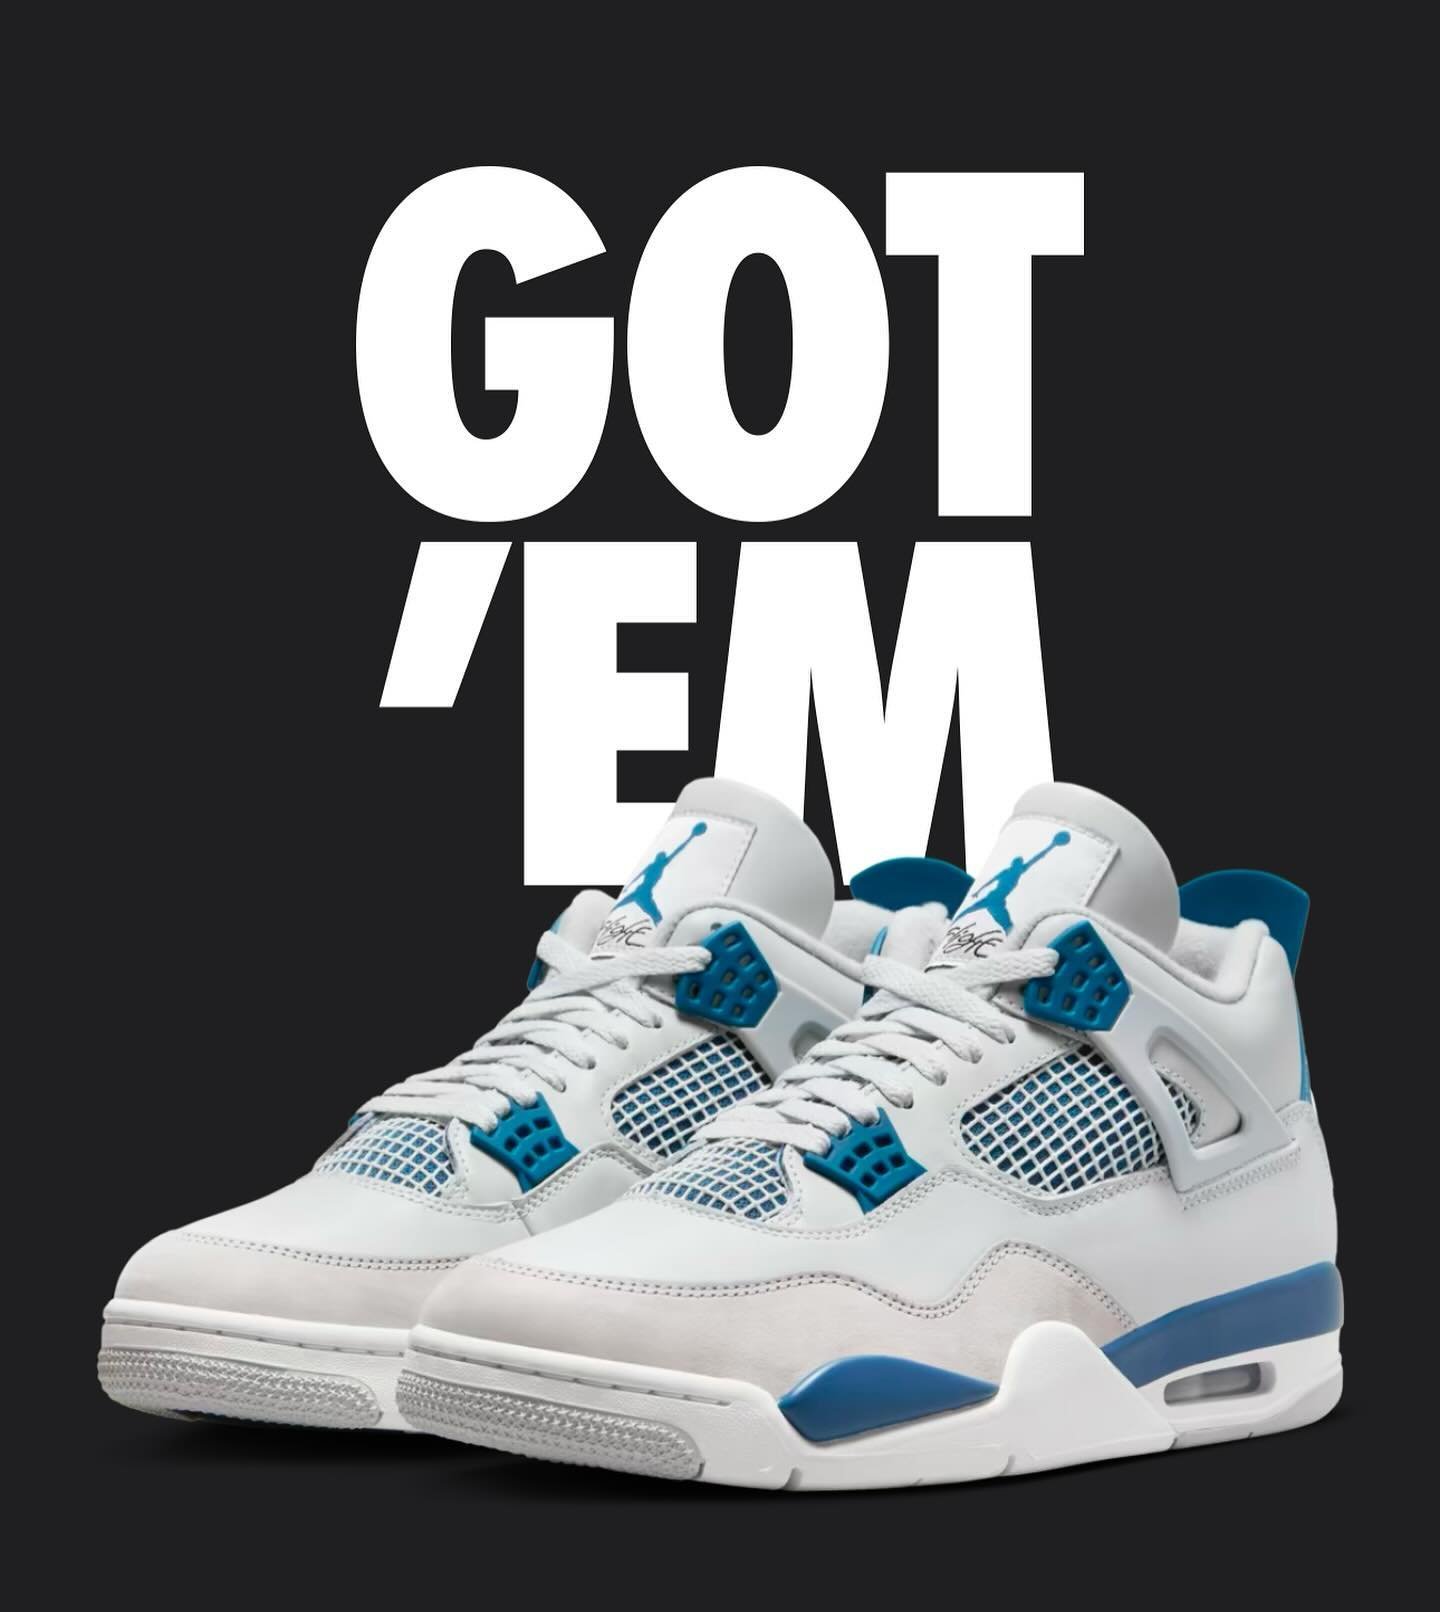 SHOCK DROP 👀 We alerted our community yesterday of a shock drop of the Air Jordan 4 &lsquo;Industrial Blue&rsquo; this morning. 

Did you manage to secure a pair? 🤔

#SneakerSpott #AirJordan4 #AirJordan4MilitaryBlue